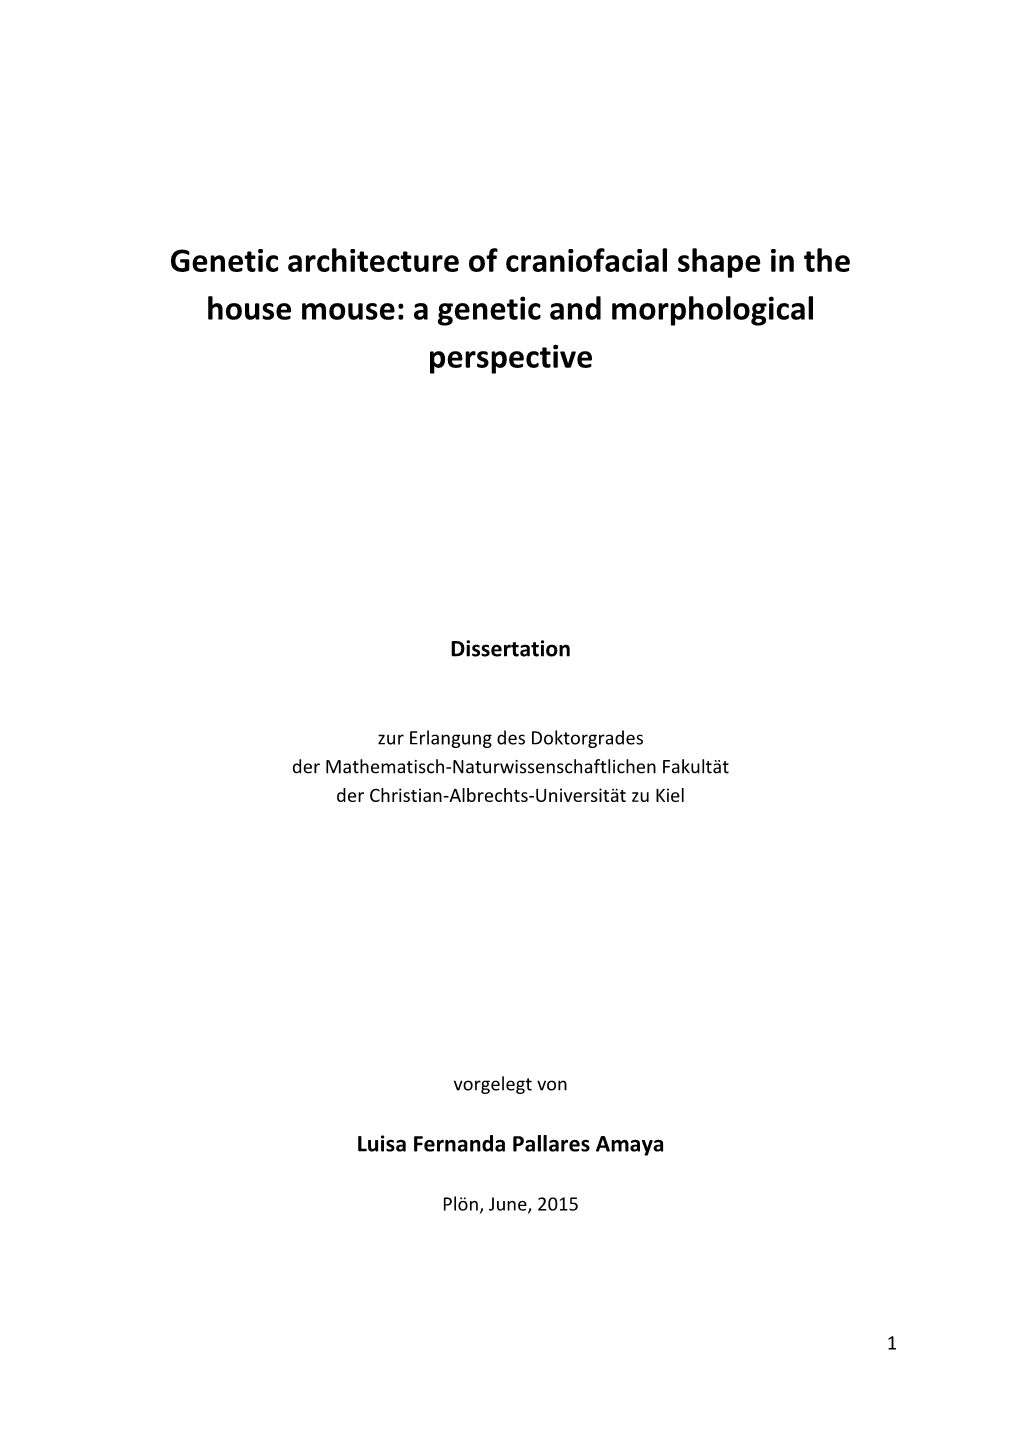 Genetic Architecture of Craniofacial Shape in the House Mouse: a Genetic and Morphological Perspective